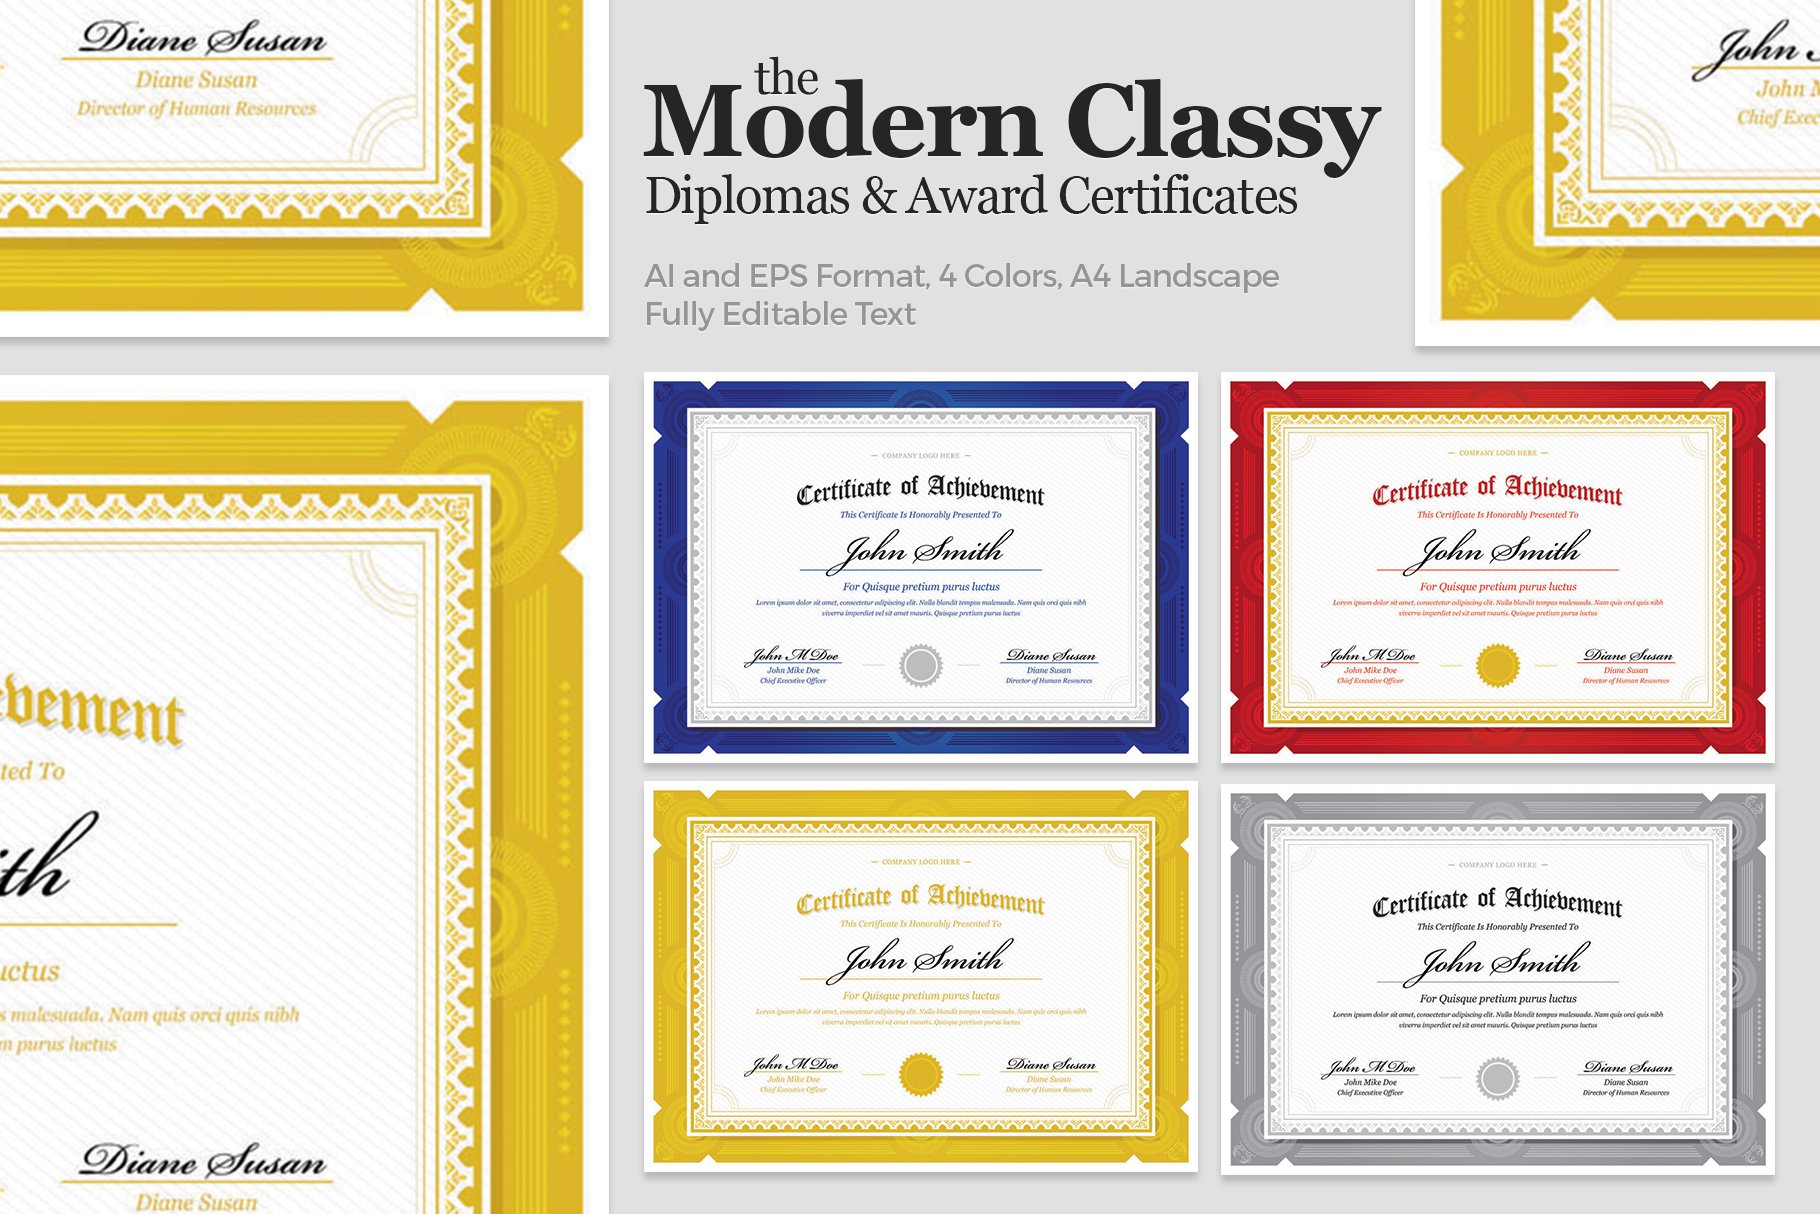 Modern Classy Diploma Certificate cover image.